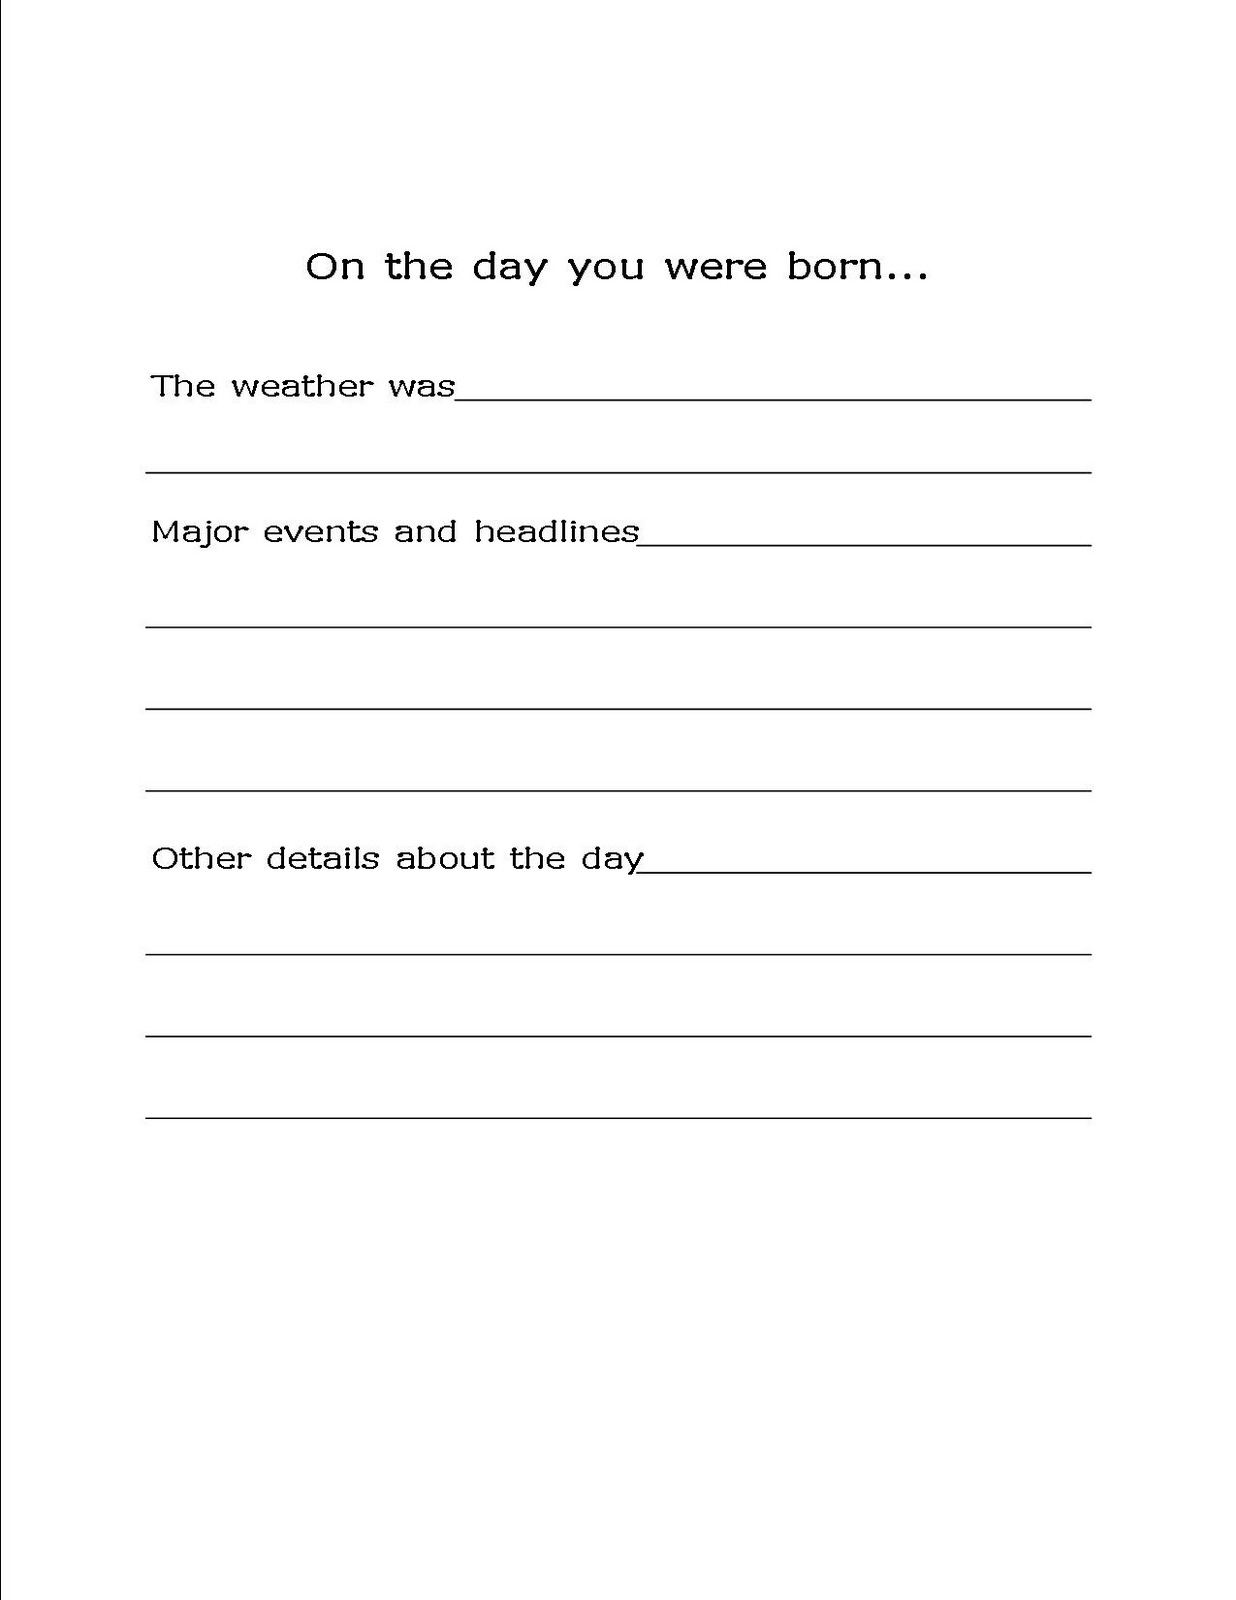 Free Printables Archives - Bare Feet On The Dashboard - The Year You Were Born Printable Free